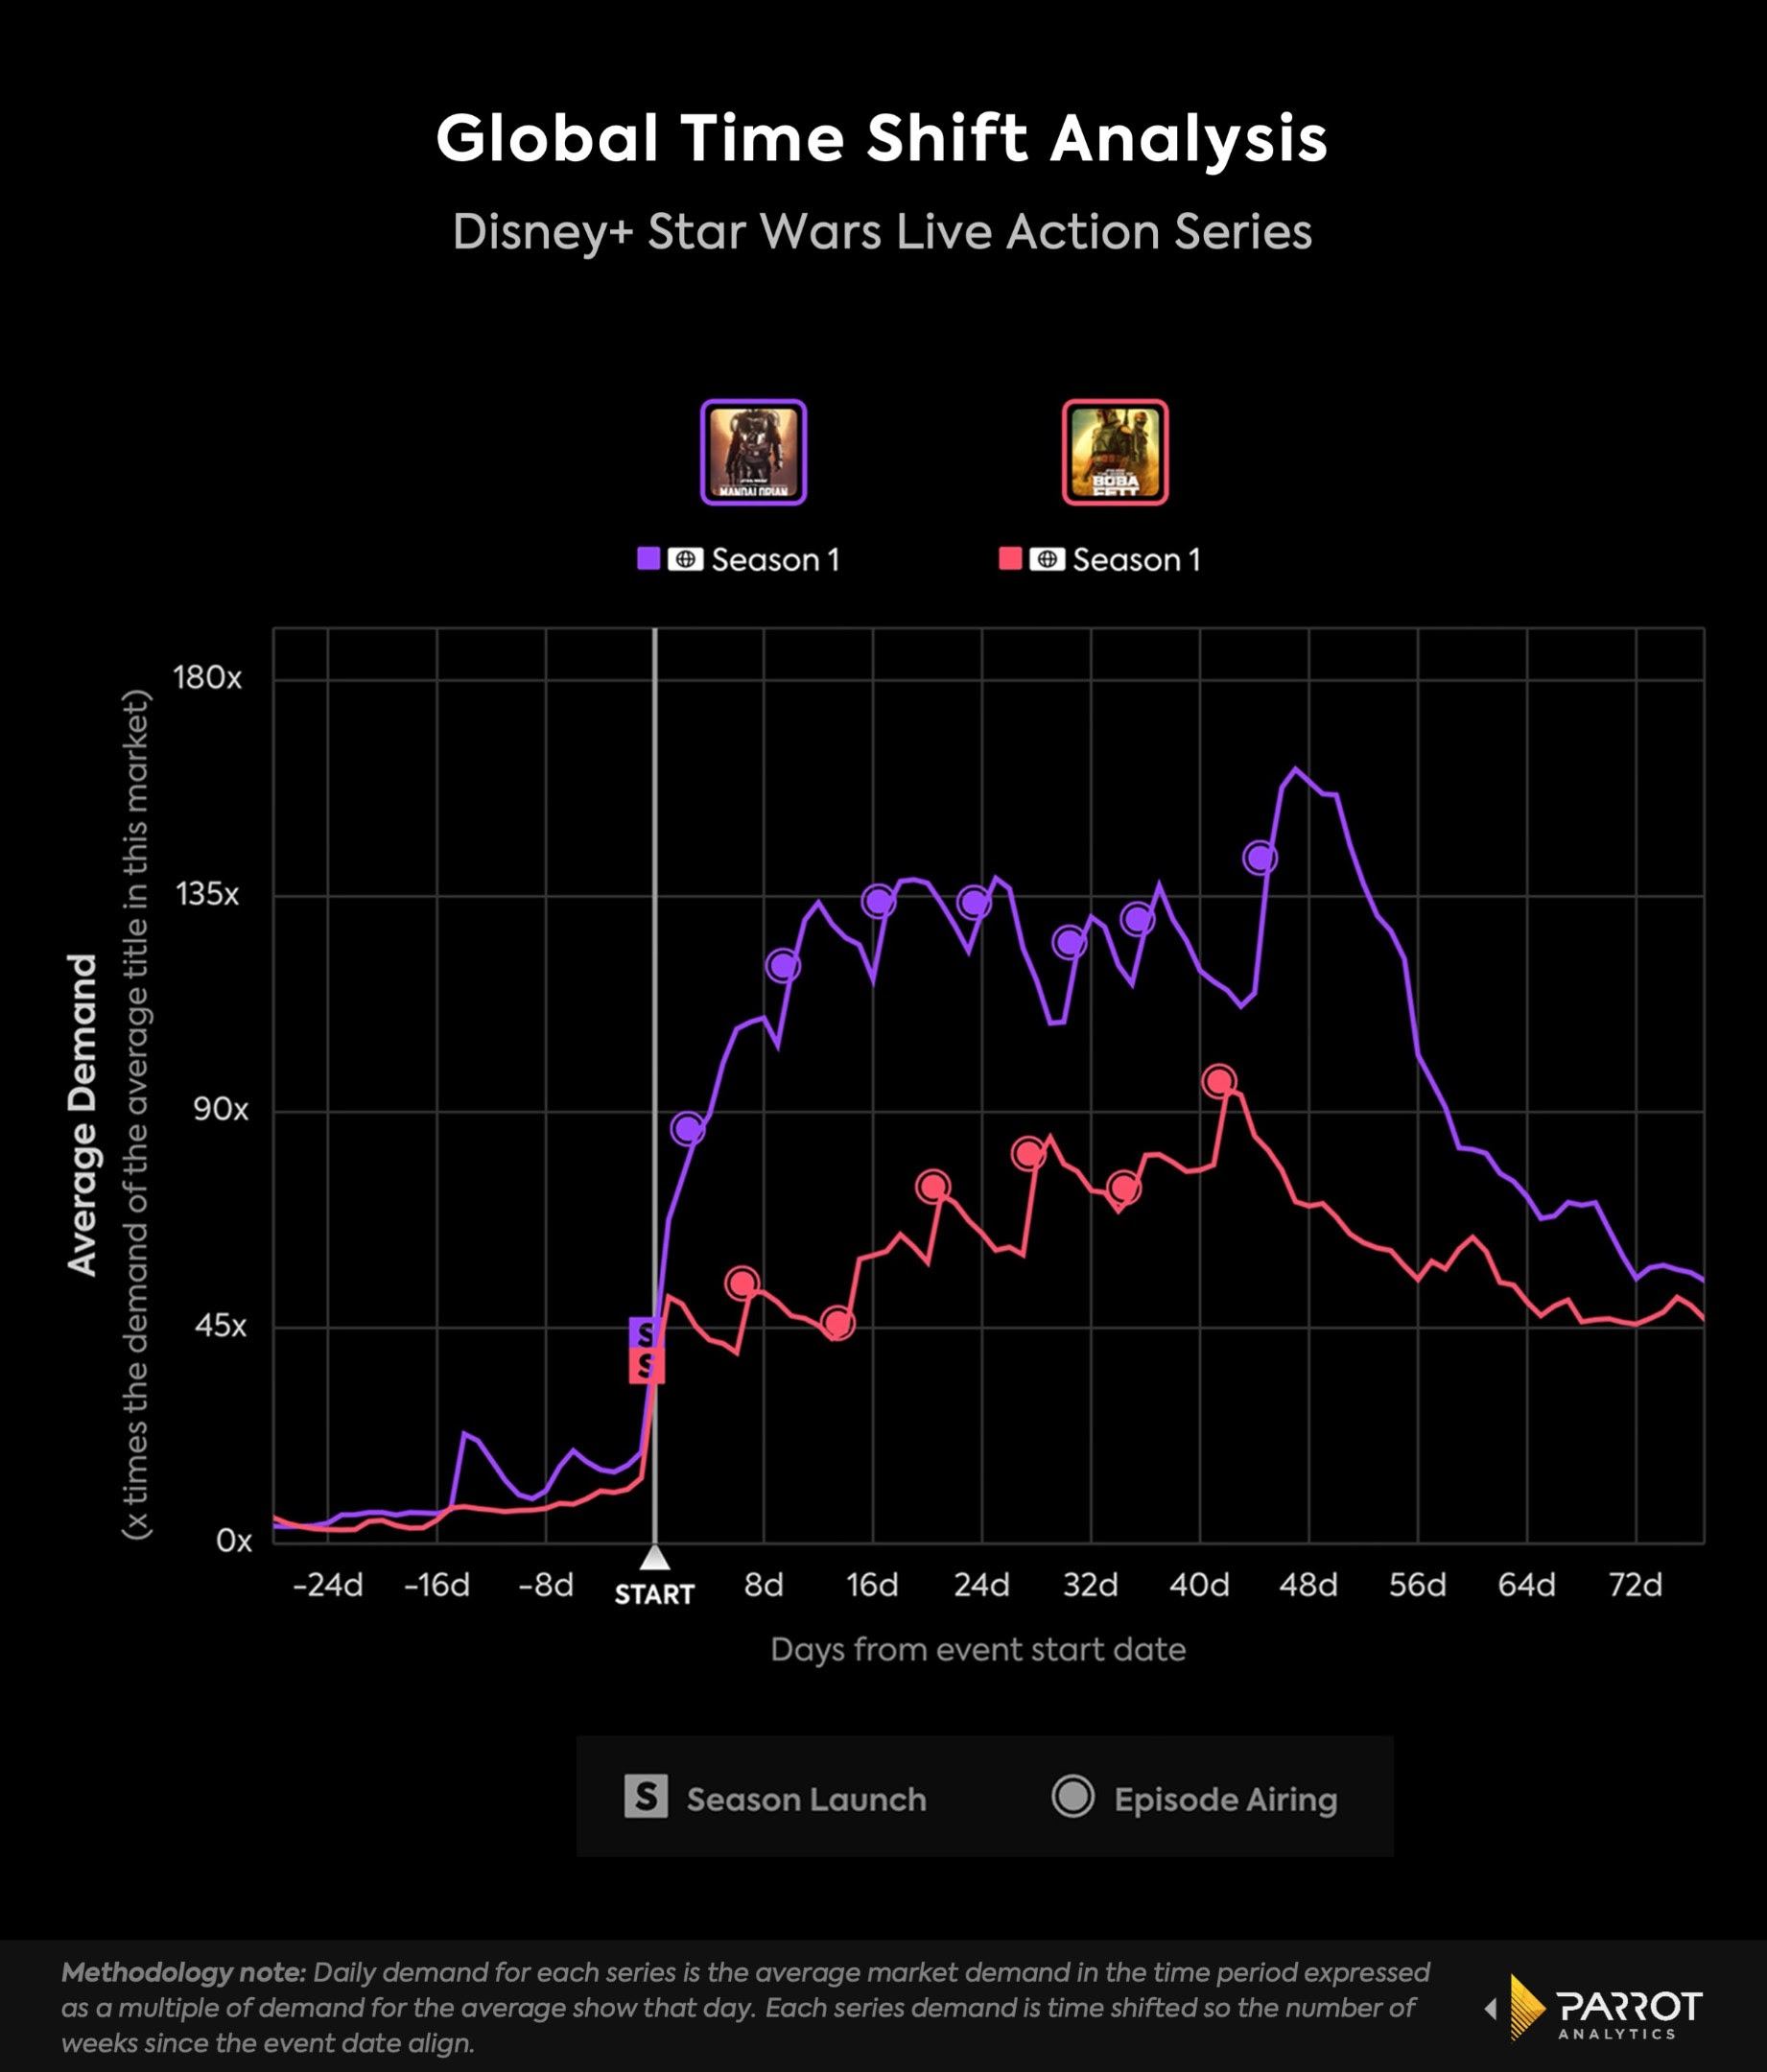 A graph showing the popularity of The Mandalorian compared to The Book of Boba Fett